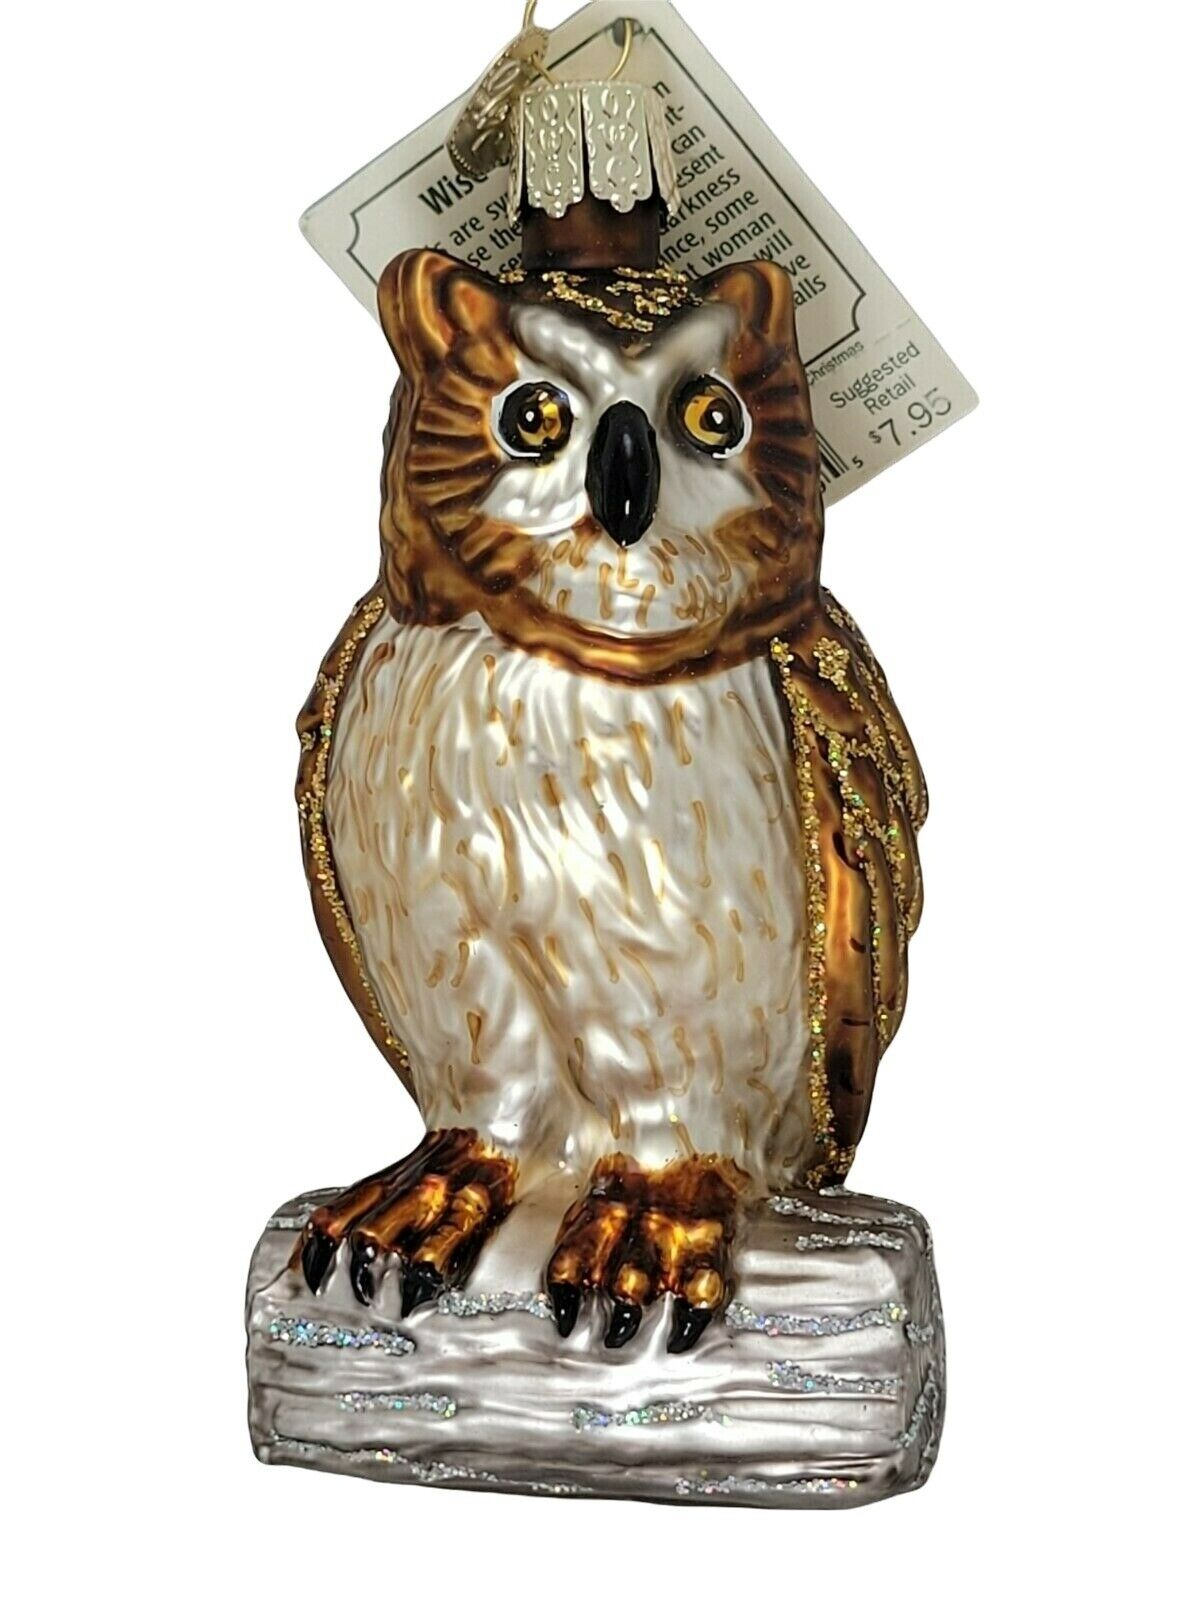 Wise Old Owl Old World Christmas Tree Ornament Glass Bird Nature Wildlife